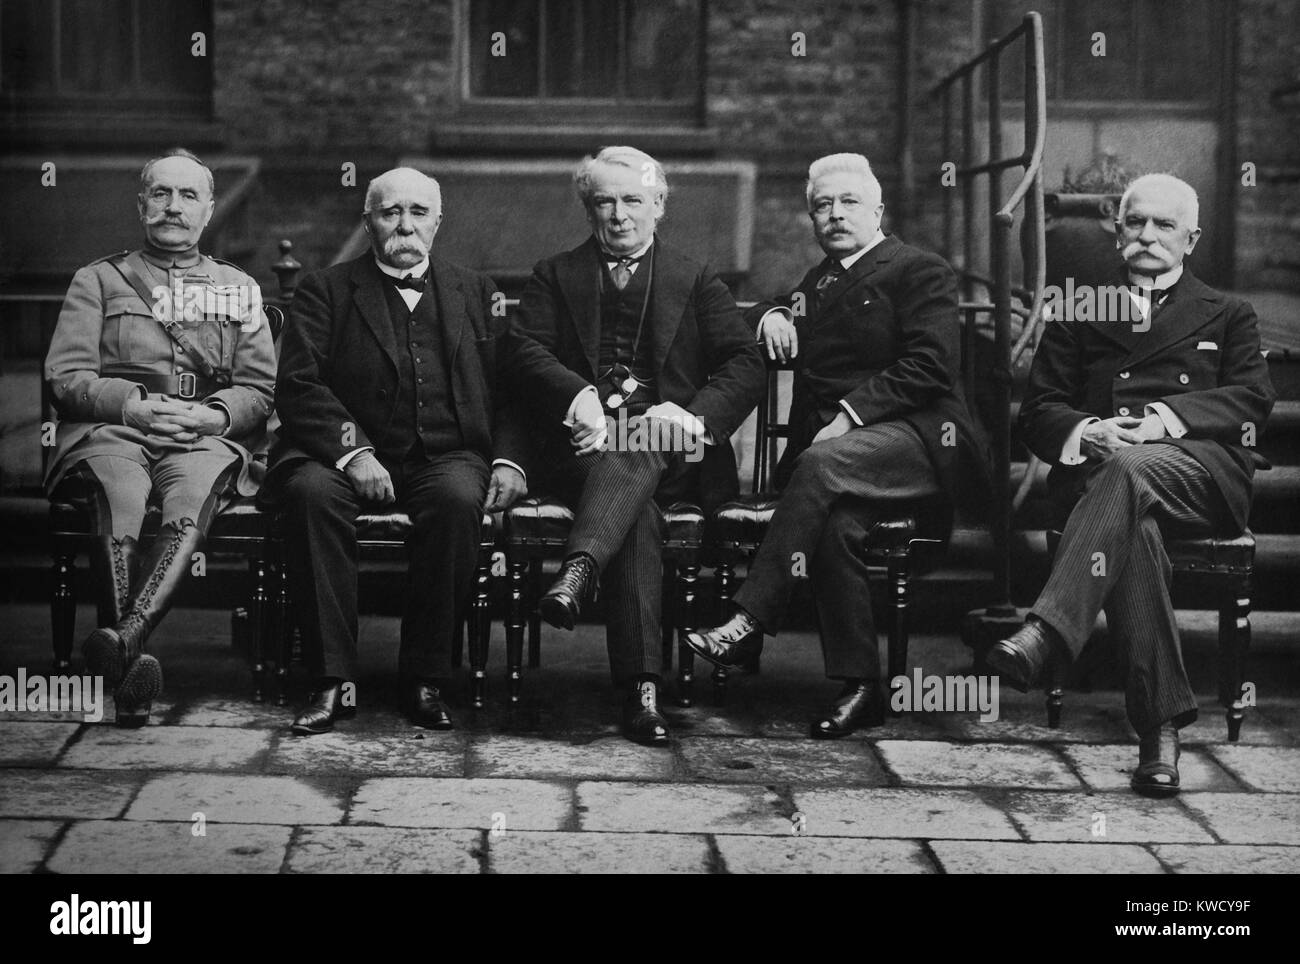 European Allied leaders in Paris Peace Conference, 1919. L-R: French Marshal Ferdinand Foch, French Premier Georges Clemenceau, British Prime Minister Lloyd George, Italian Premier Vittorio Orlando, and Italian Foreign Minister Sidney Sonnino (BSLOC 2017 1 70) Stock Photo